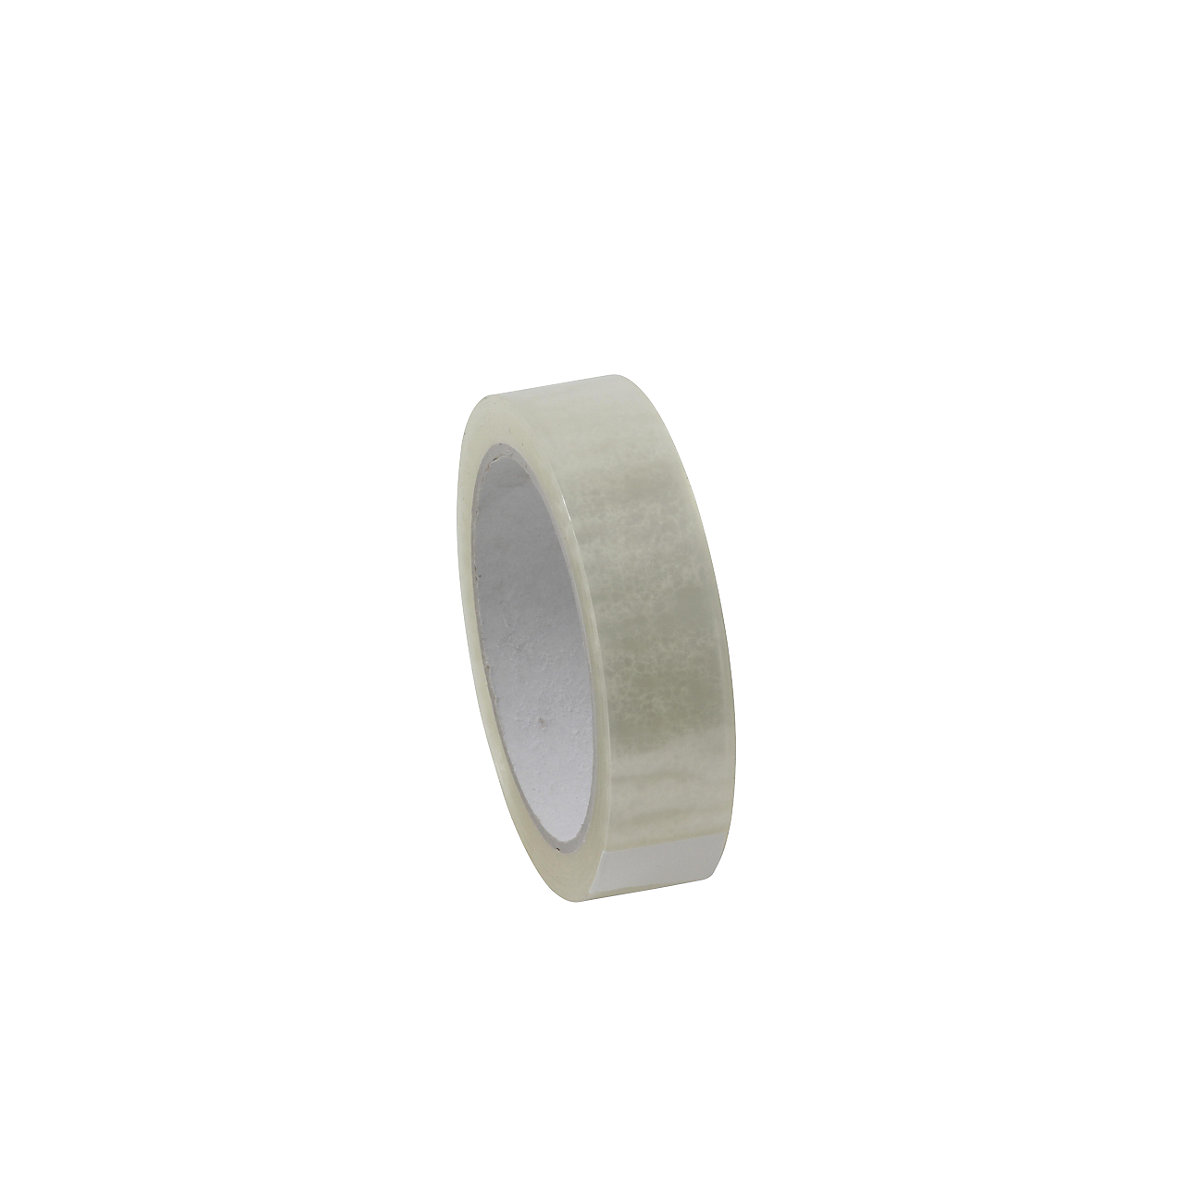 PP packing tape, quiet model, pack of 72 rolls, transparent, tape width 25 mm-5